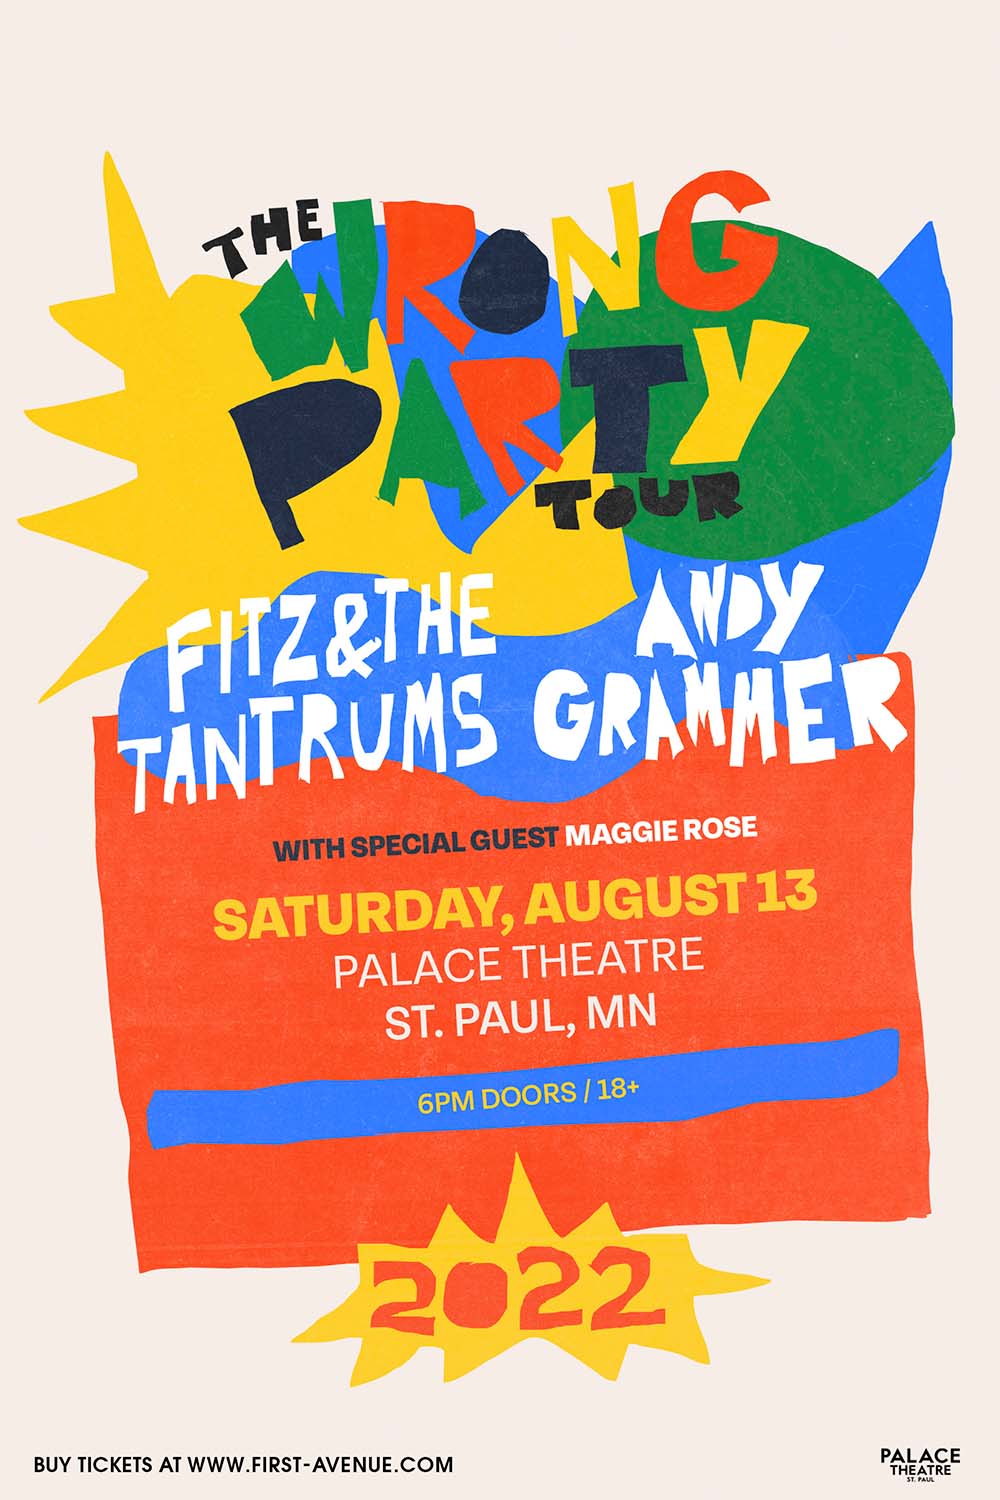 fitz and the tantrums tour andy grammer